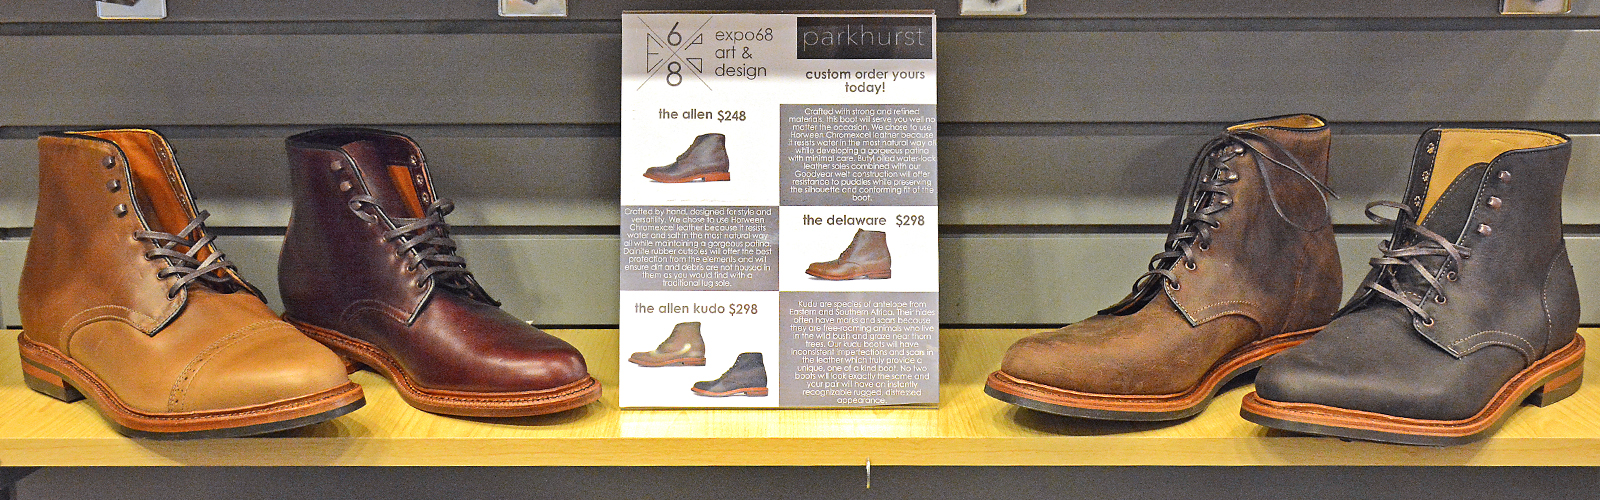 The Parkhurst boot line is handmade in Batavia, N.Y., and sold at the Eastern Hills Mall, on Etsy, and direct from the Parkhurst website.